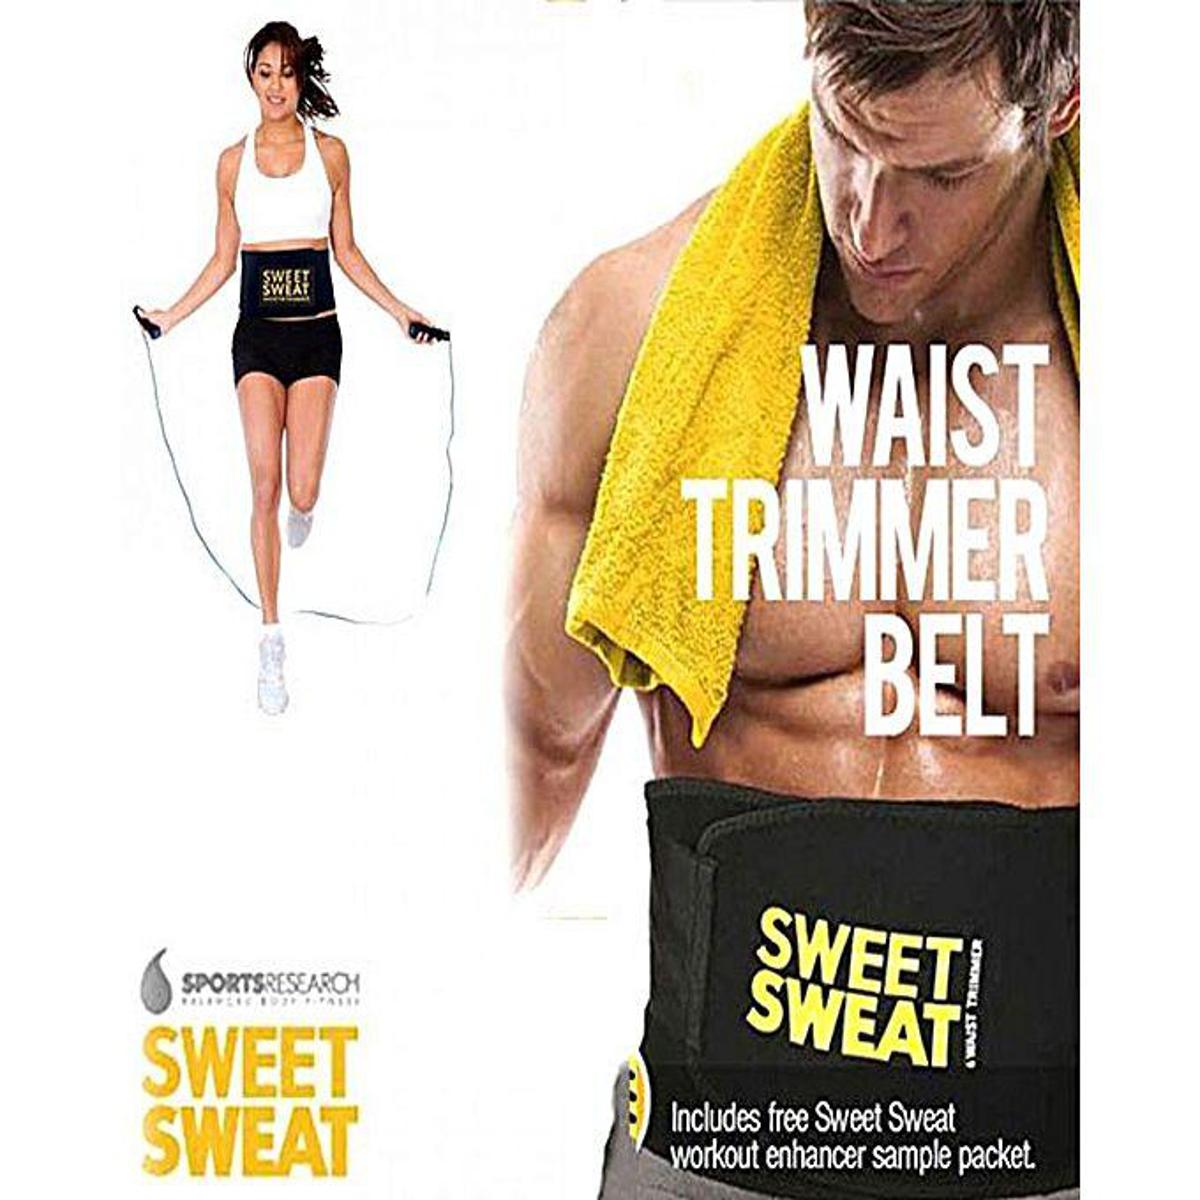 Buy Sweet Sweat Waist Trimmer Belt-large at Lowest Price in Pakistan